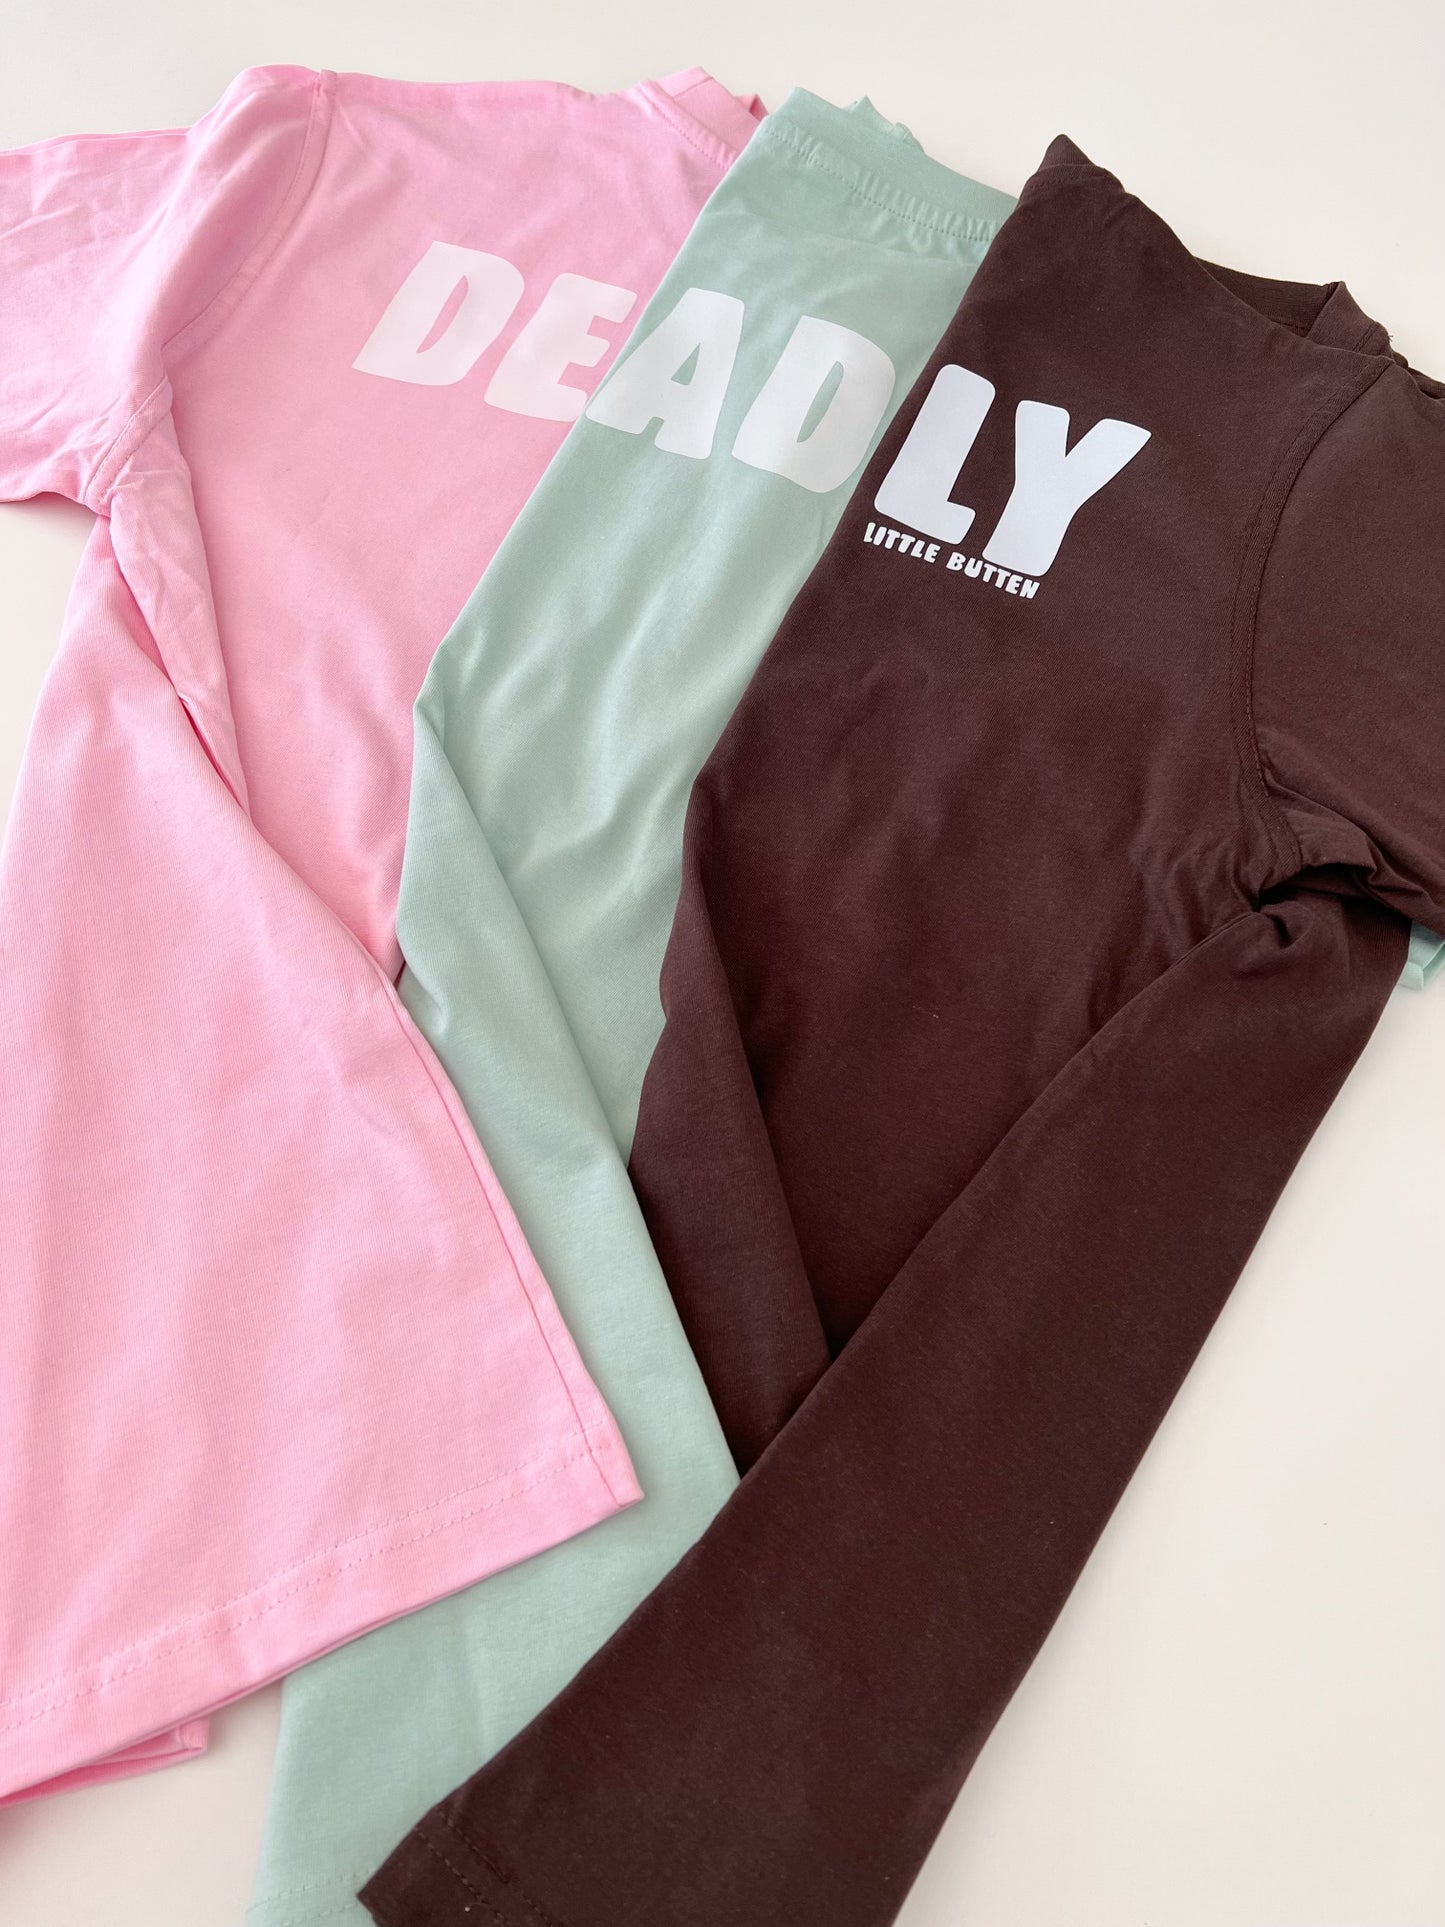 Spring Deadly Shirts